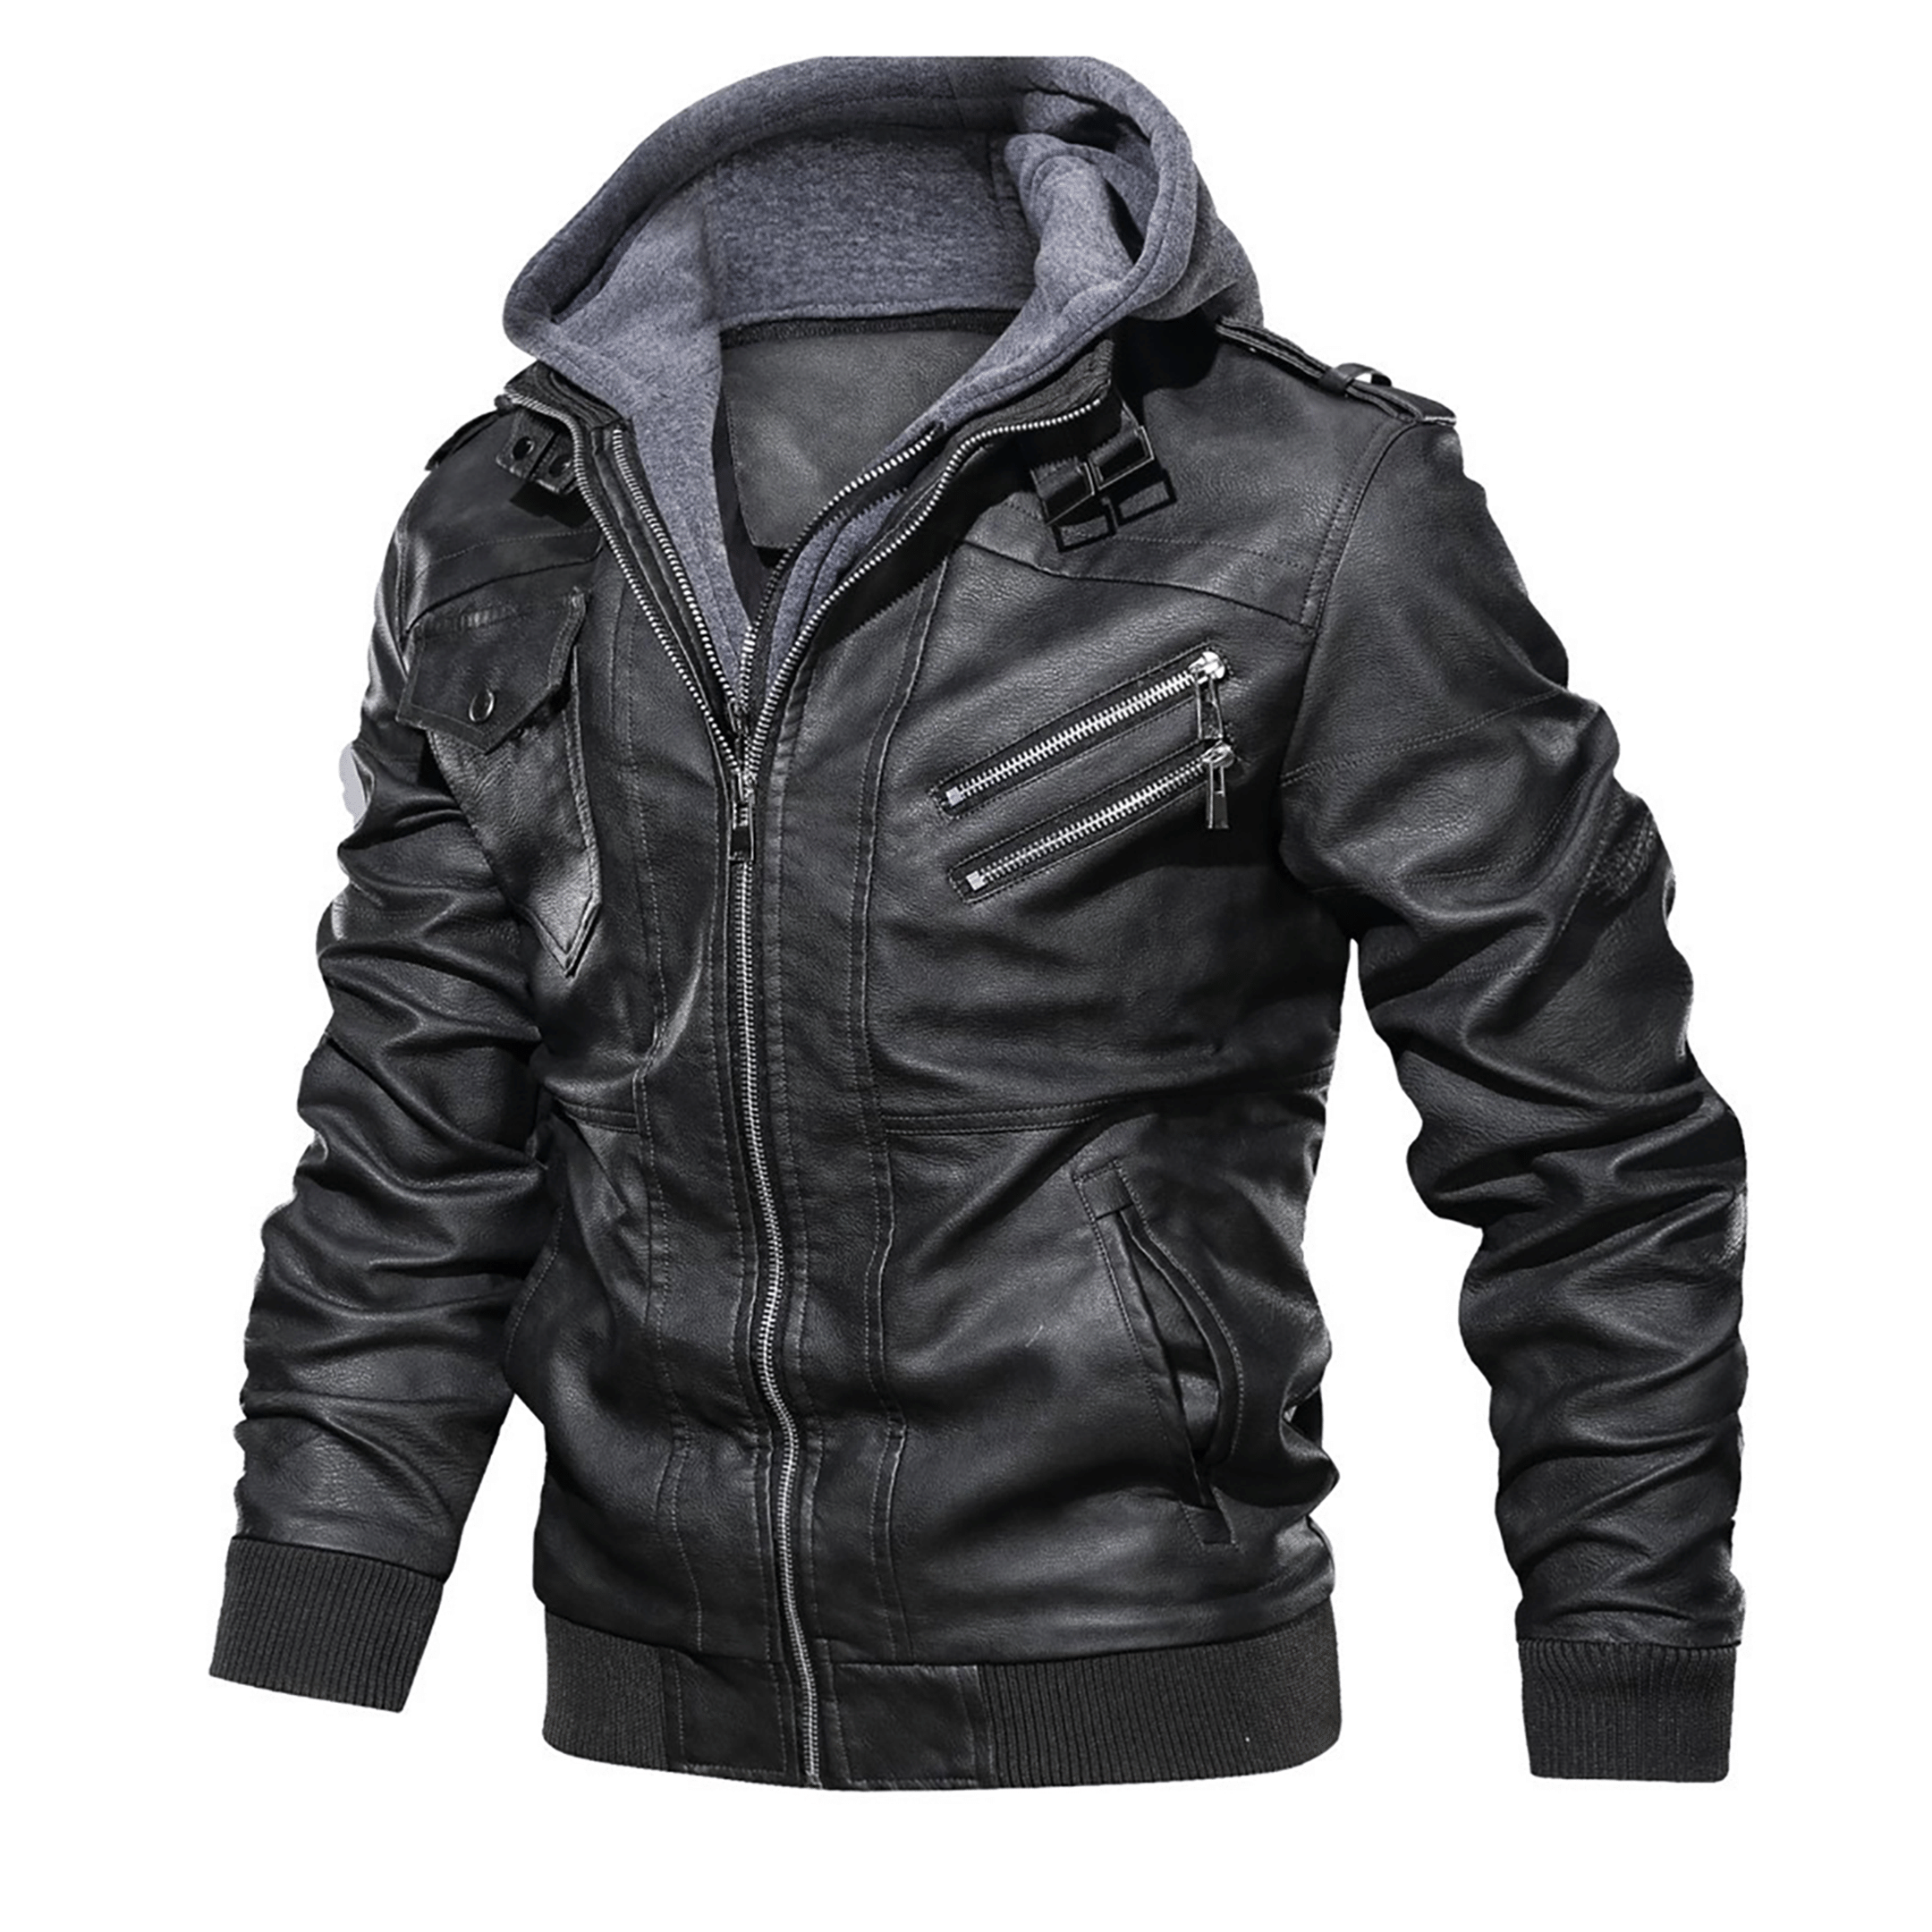 Top leather jackets and latest products 341